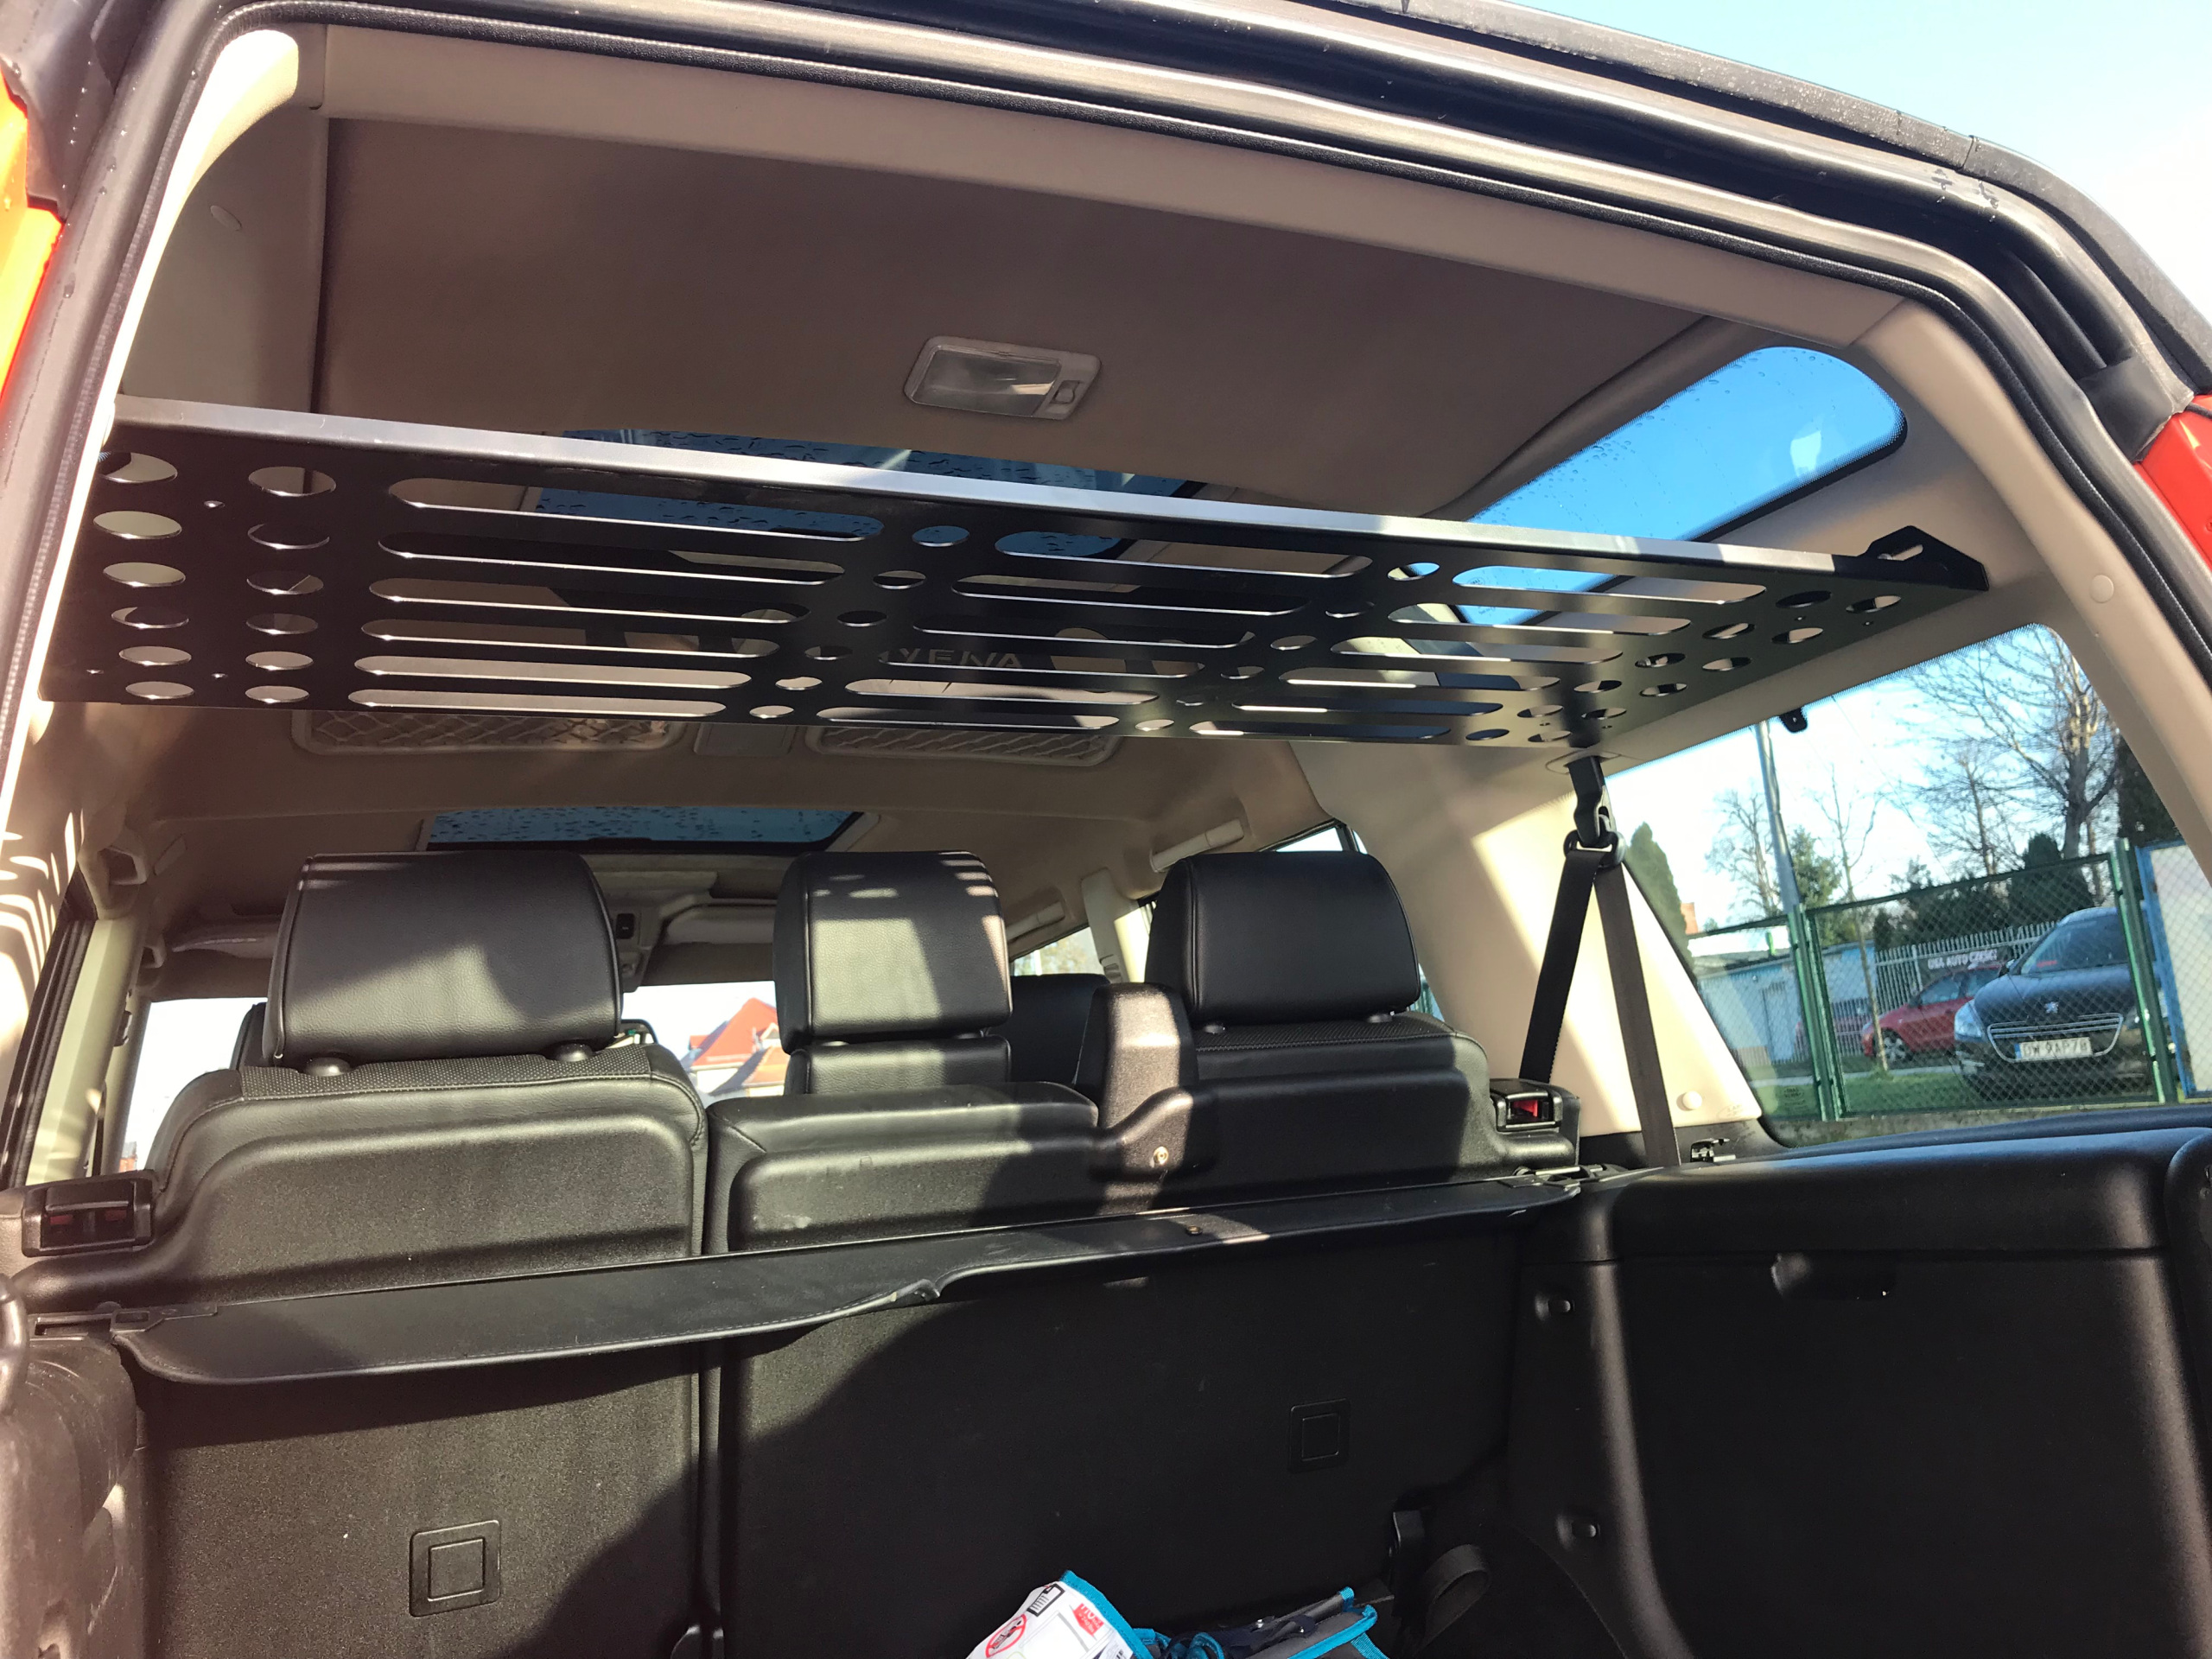 Land Rover Discovery D2 Boot Roof Shelf